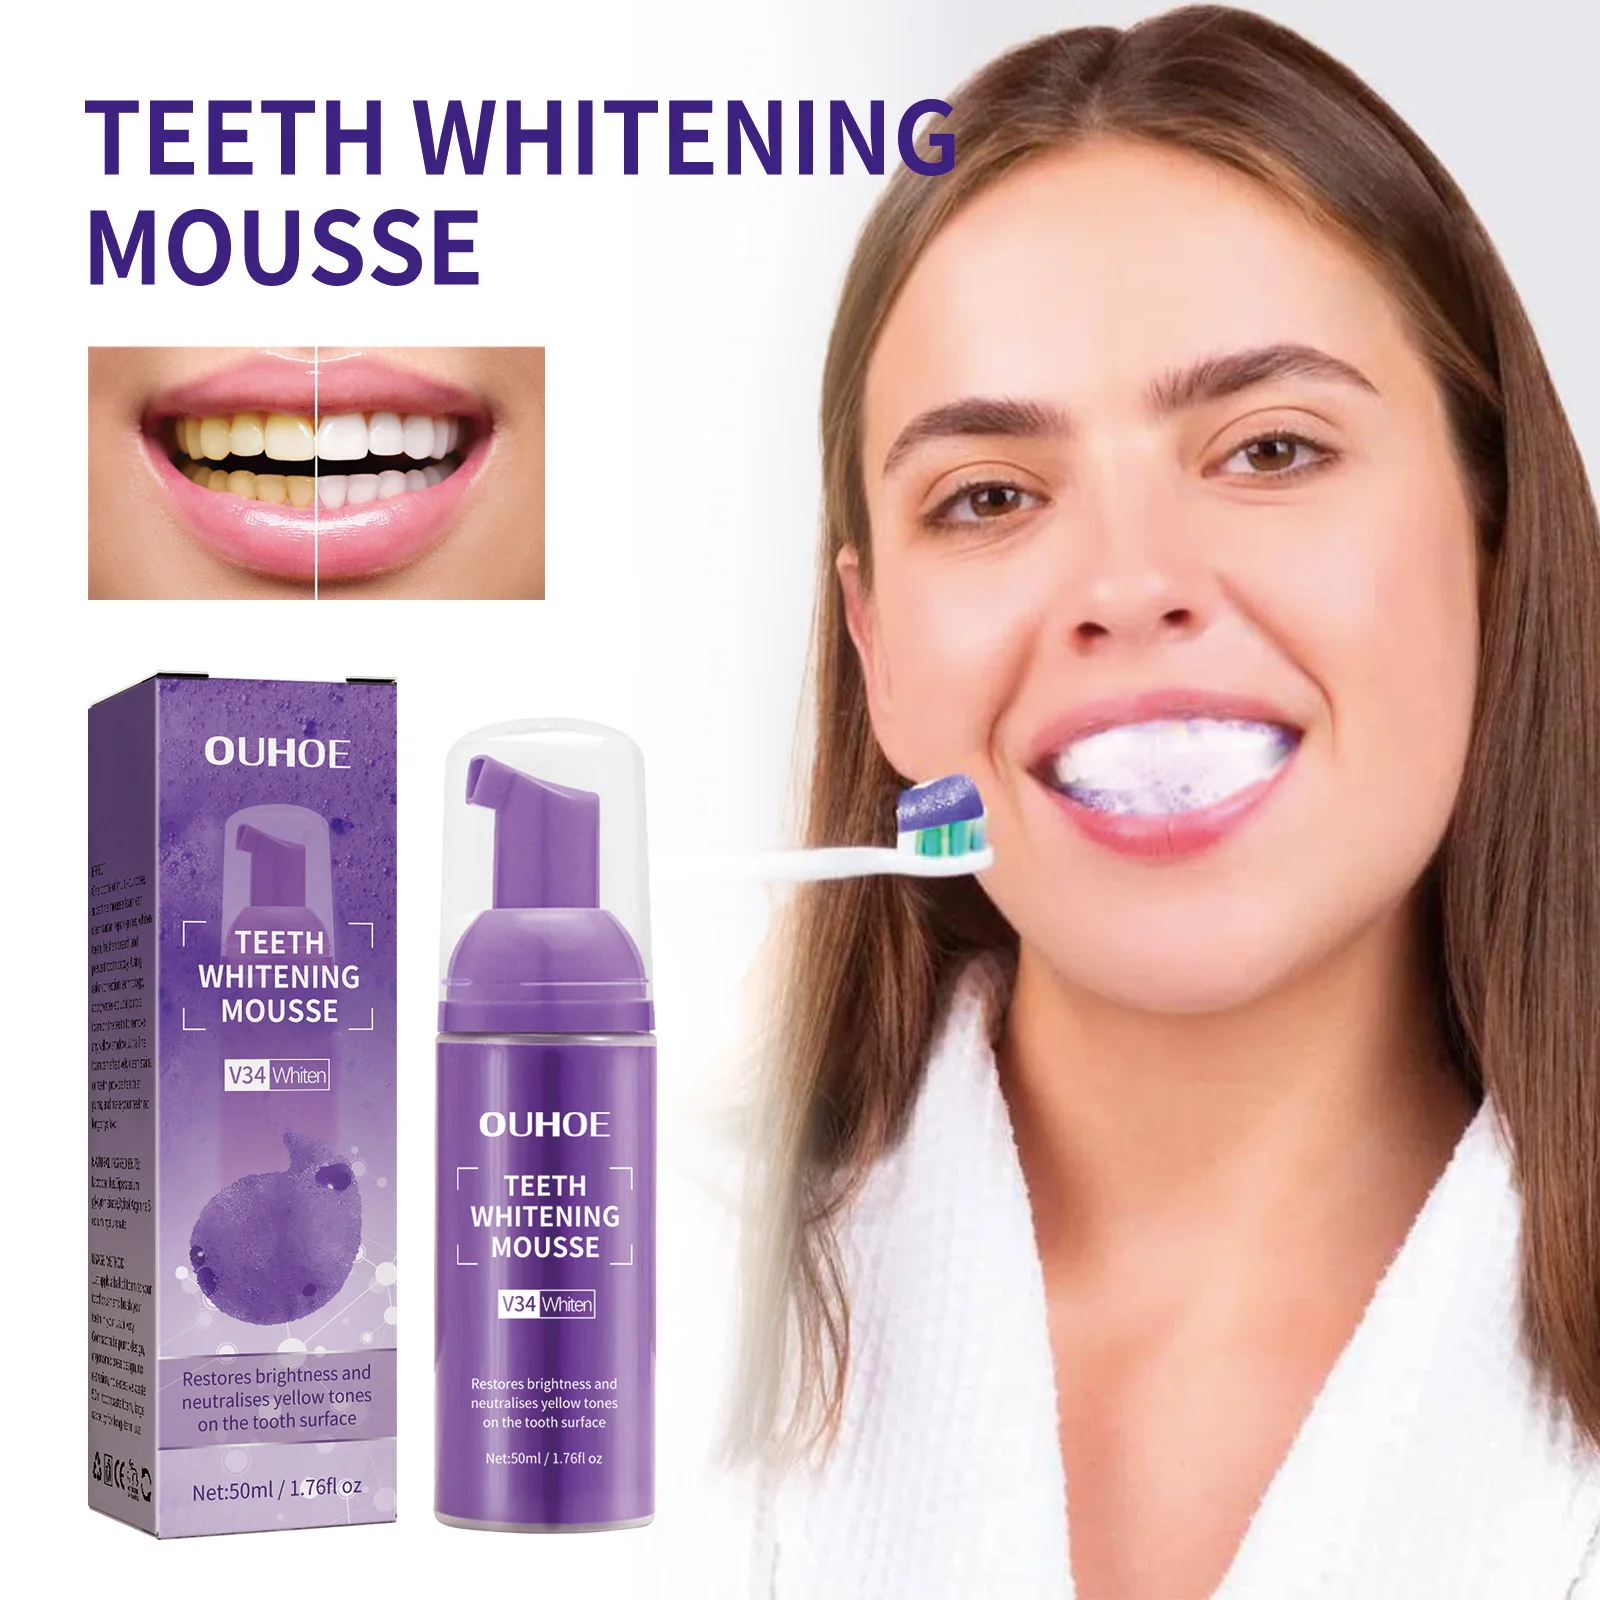 

5/1/pcs Teeth Whitening Mousse Deep Cleaning Cigarette Stains Repair Bright Neutralizes Yellow Tones Dental Plaque Fresh Breath